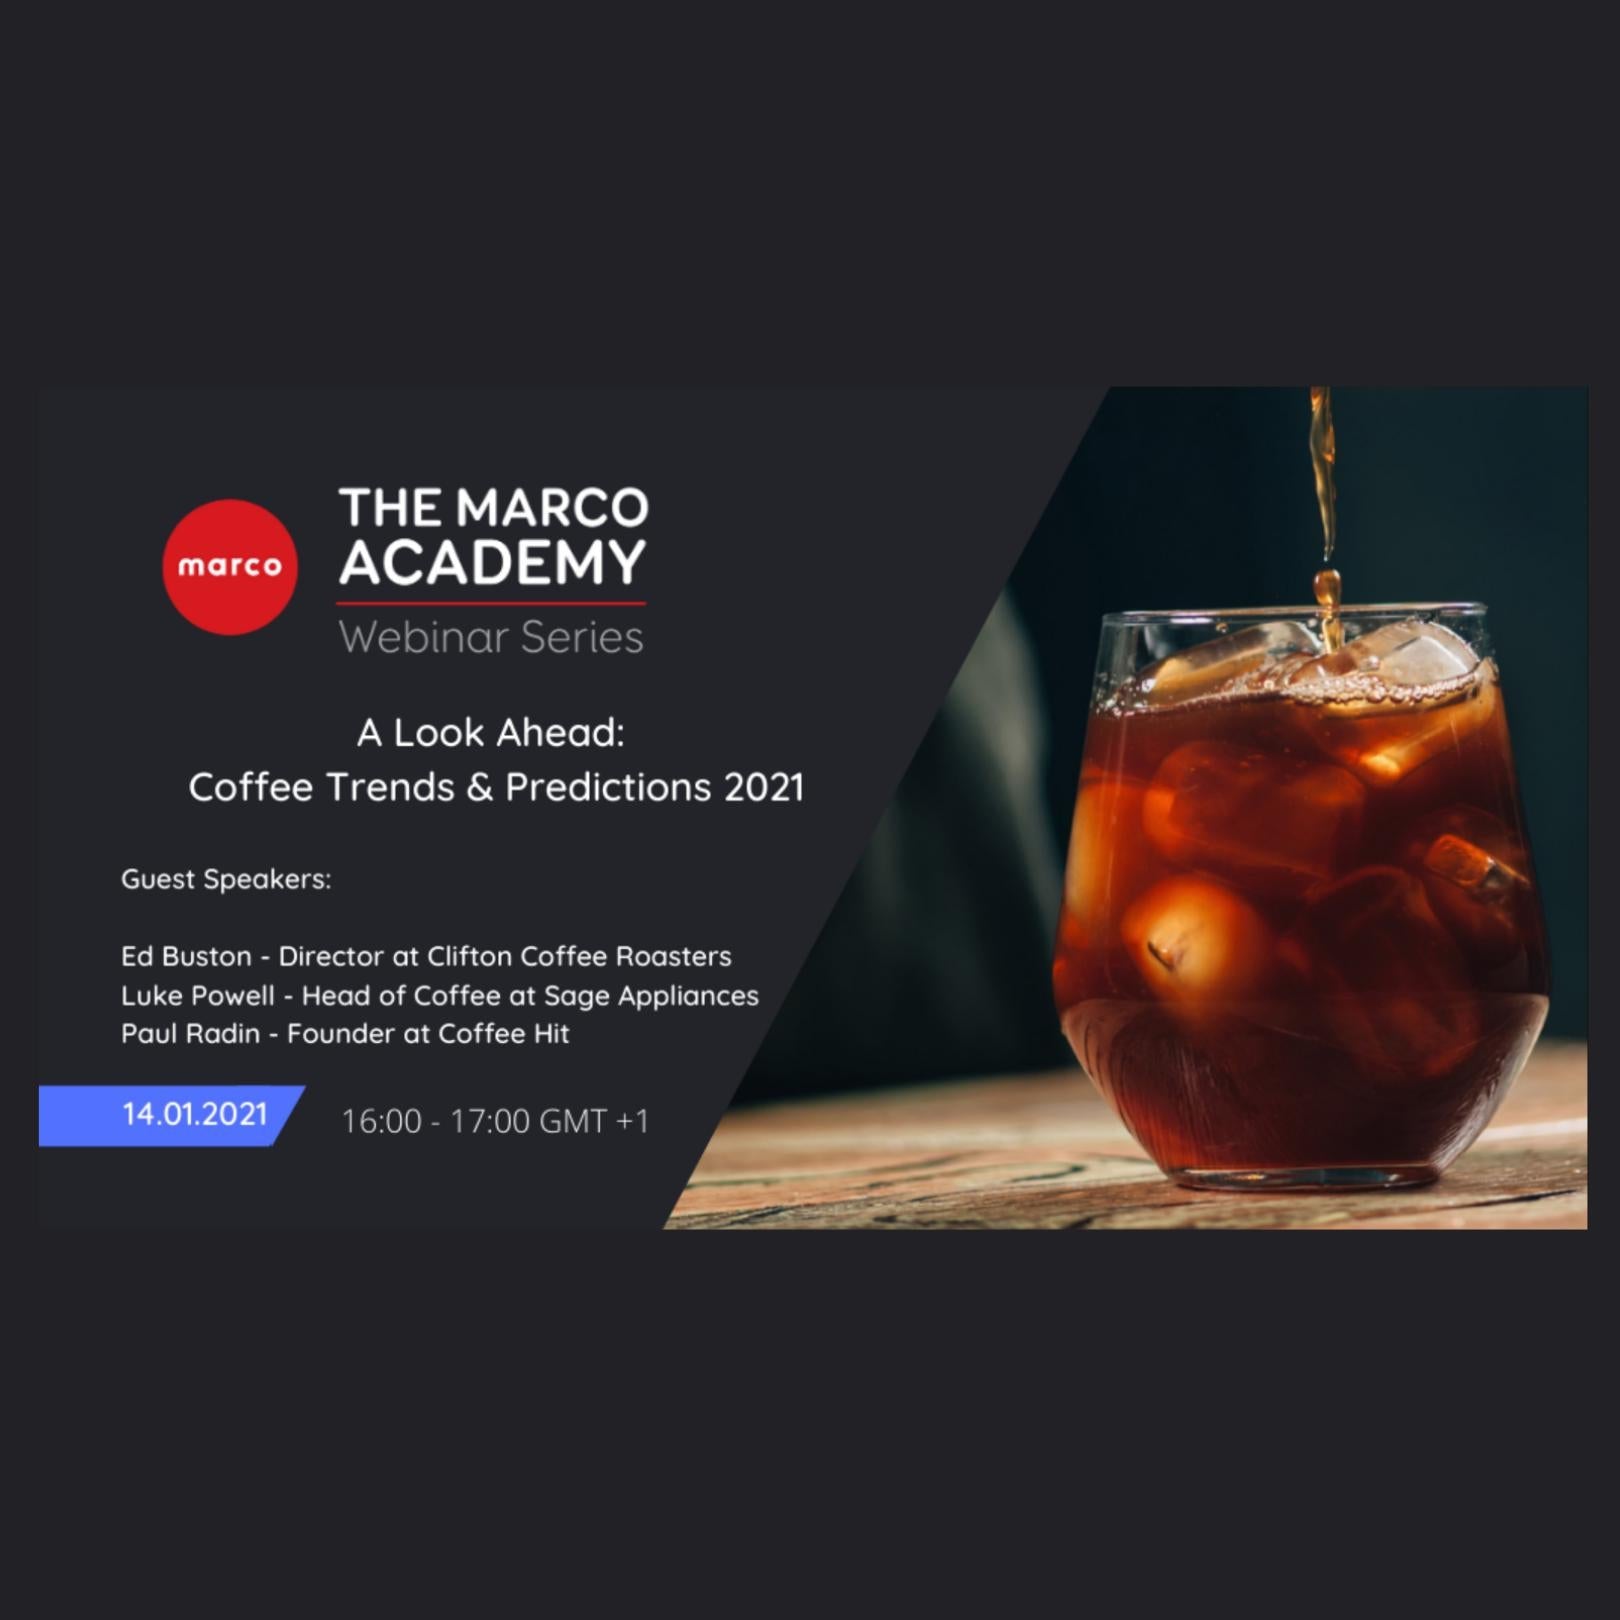 Coffee Hit owner Paul Radin shares his coffee industry predictions for 2021 with the Marco Academy. - Coffee Hit